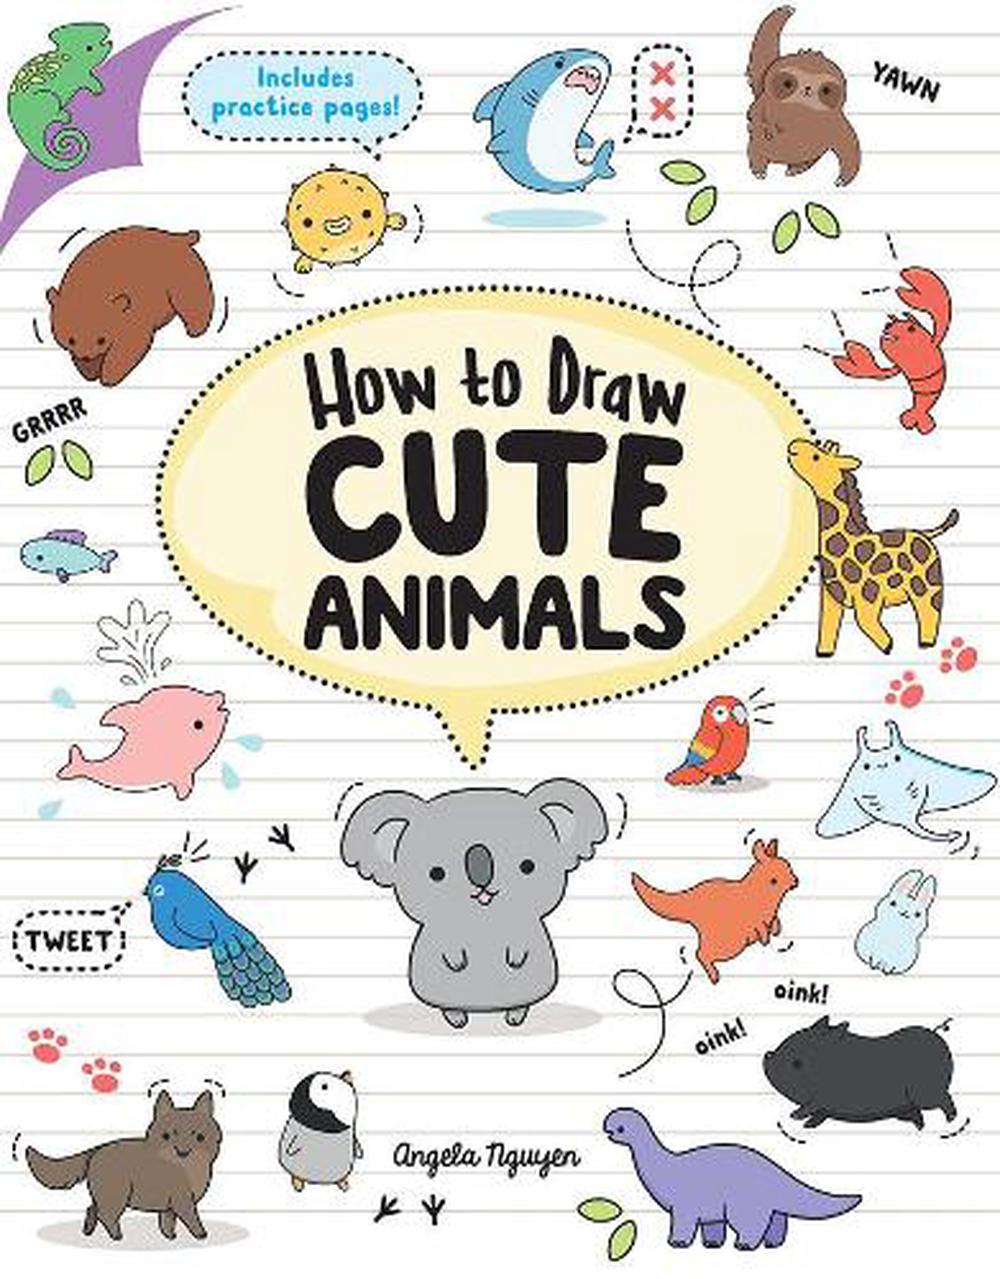 How to Draw Cute Animals by Angela Nguyen (English) Paperback Book Free